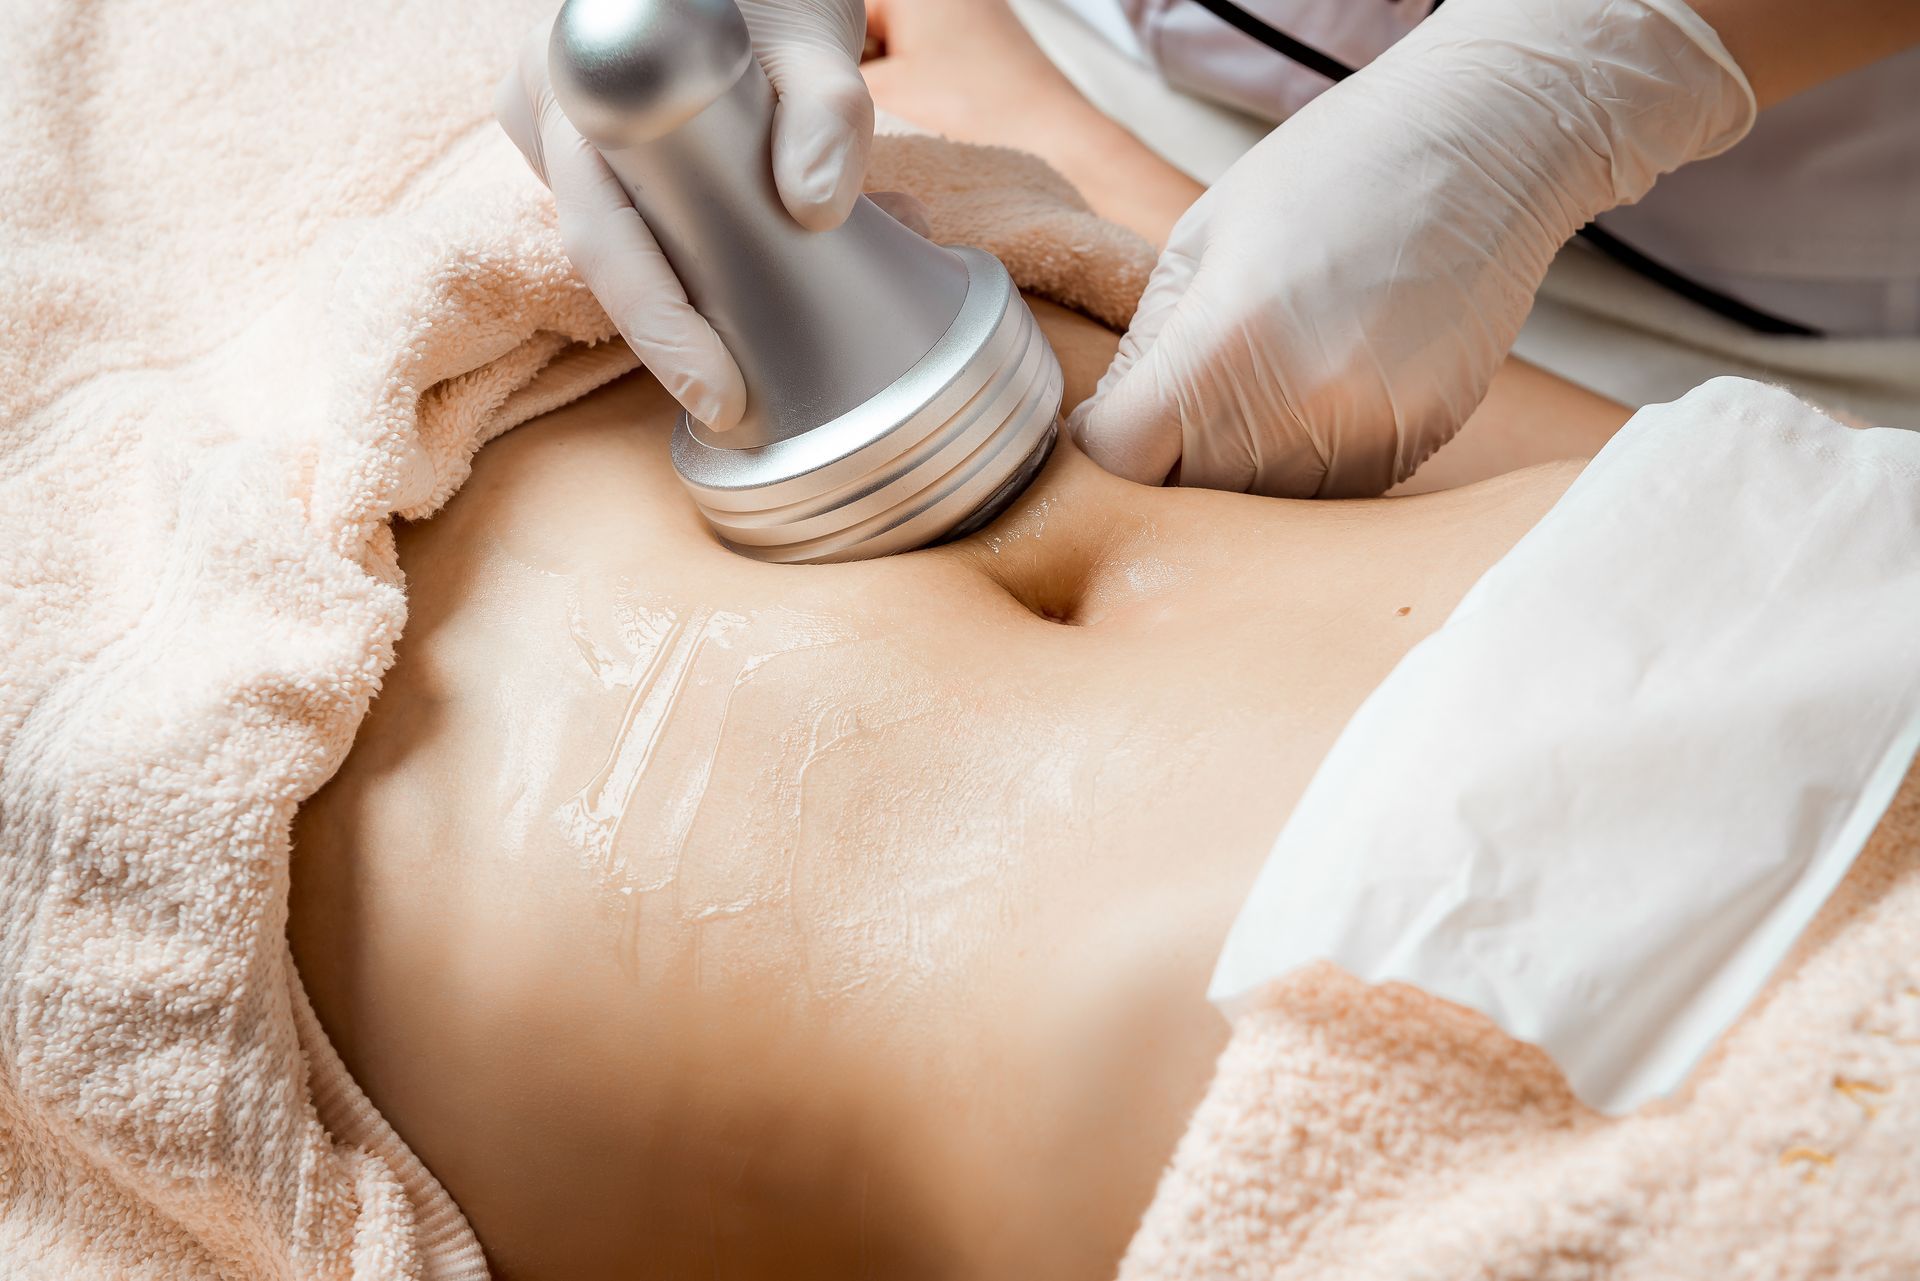 A woman is getting a treatment on her stomach in a spa